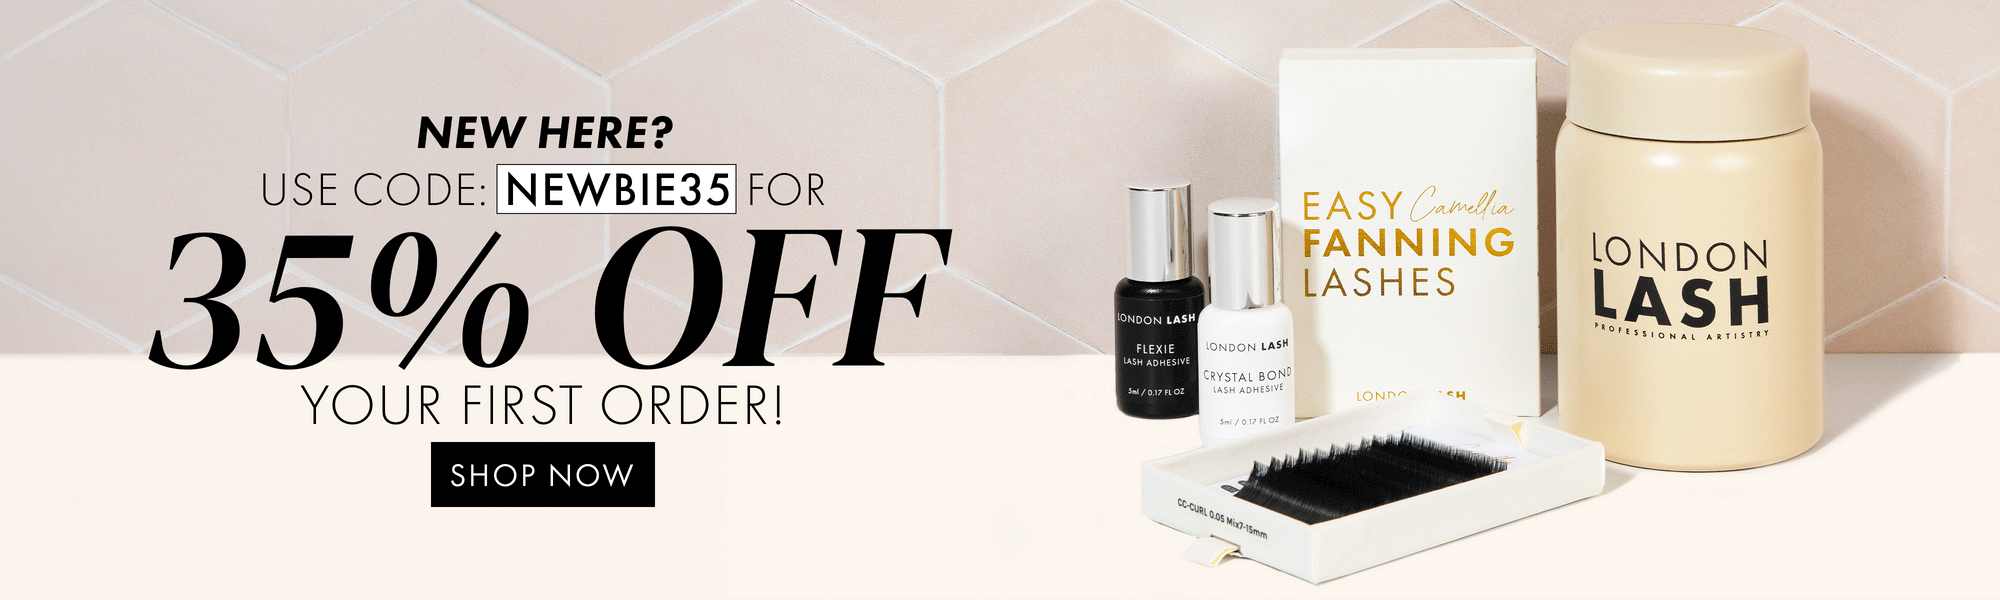 35% off your first order!